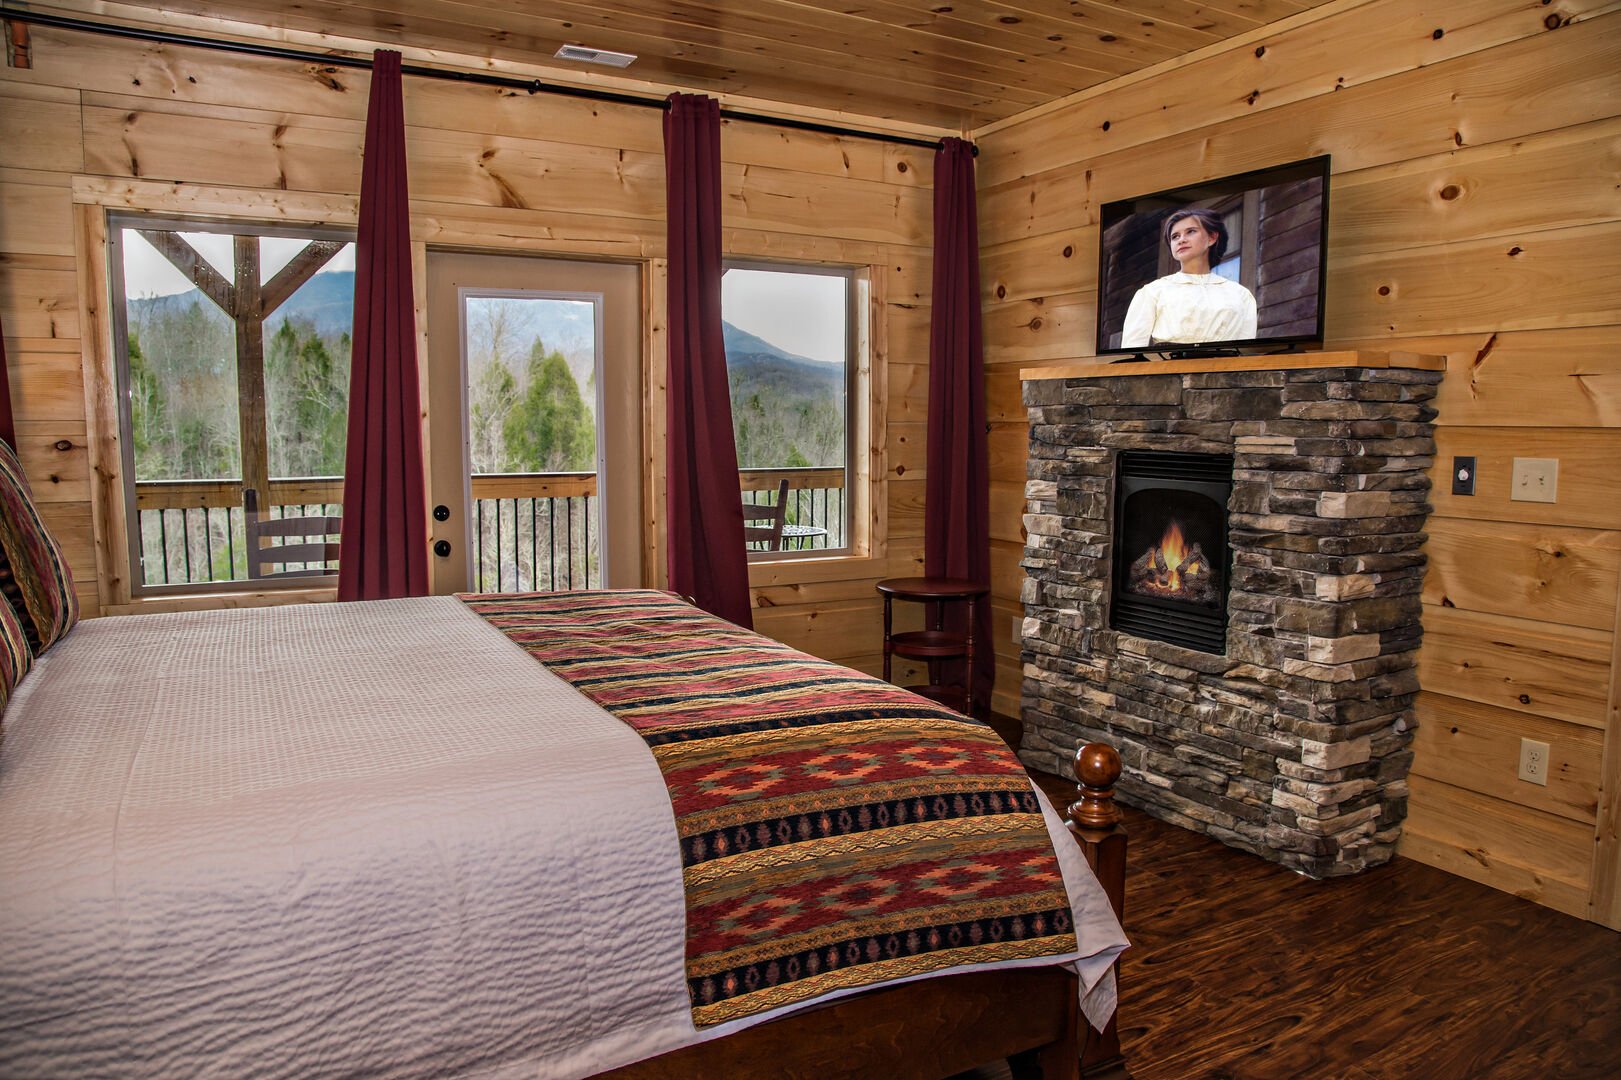 Guests Can Enjoy a Fireplace and TV in Bedroom.